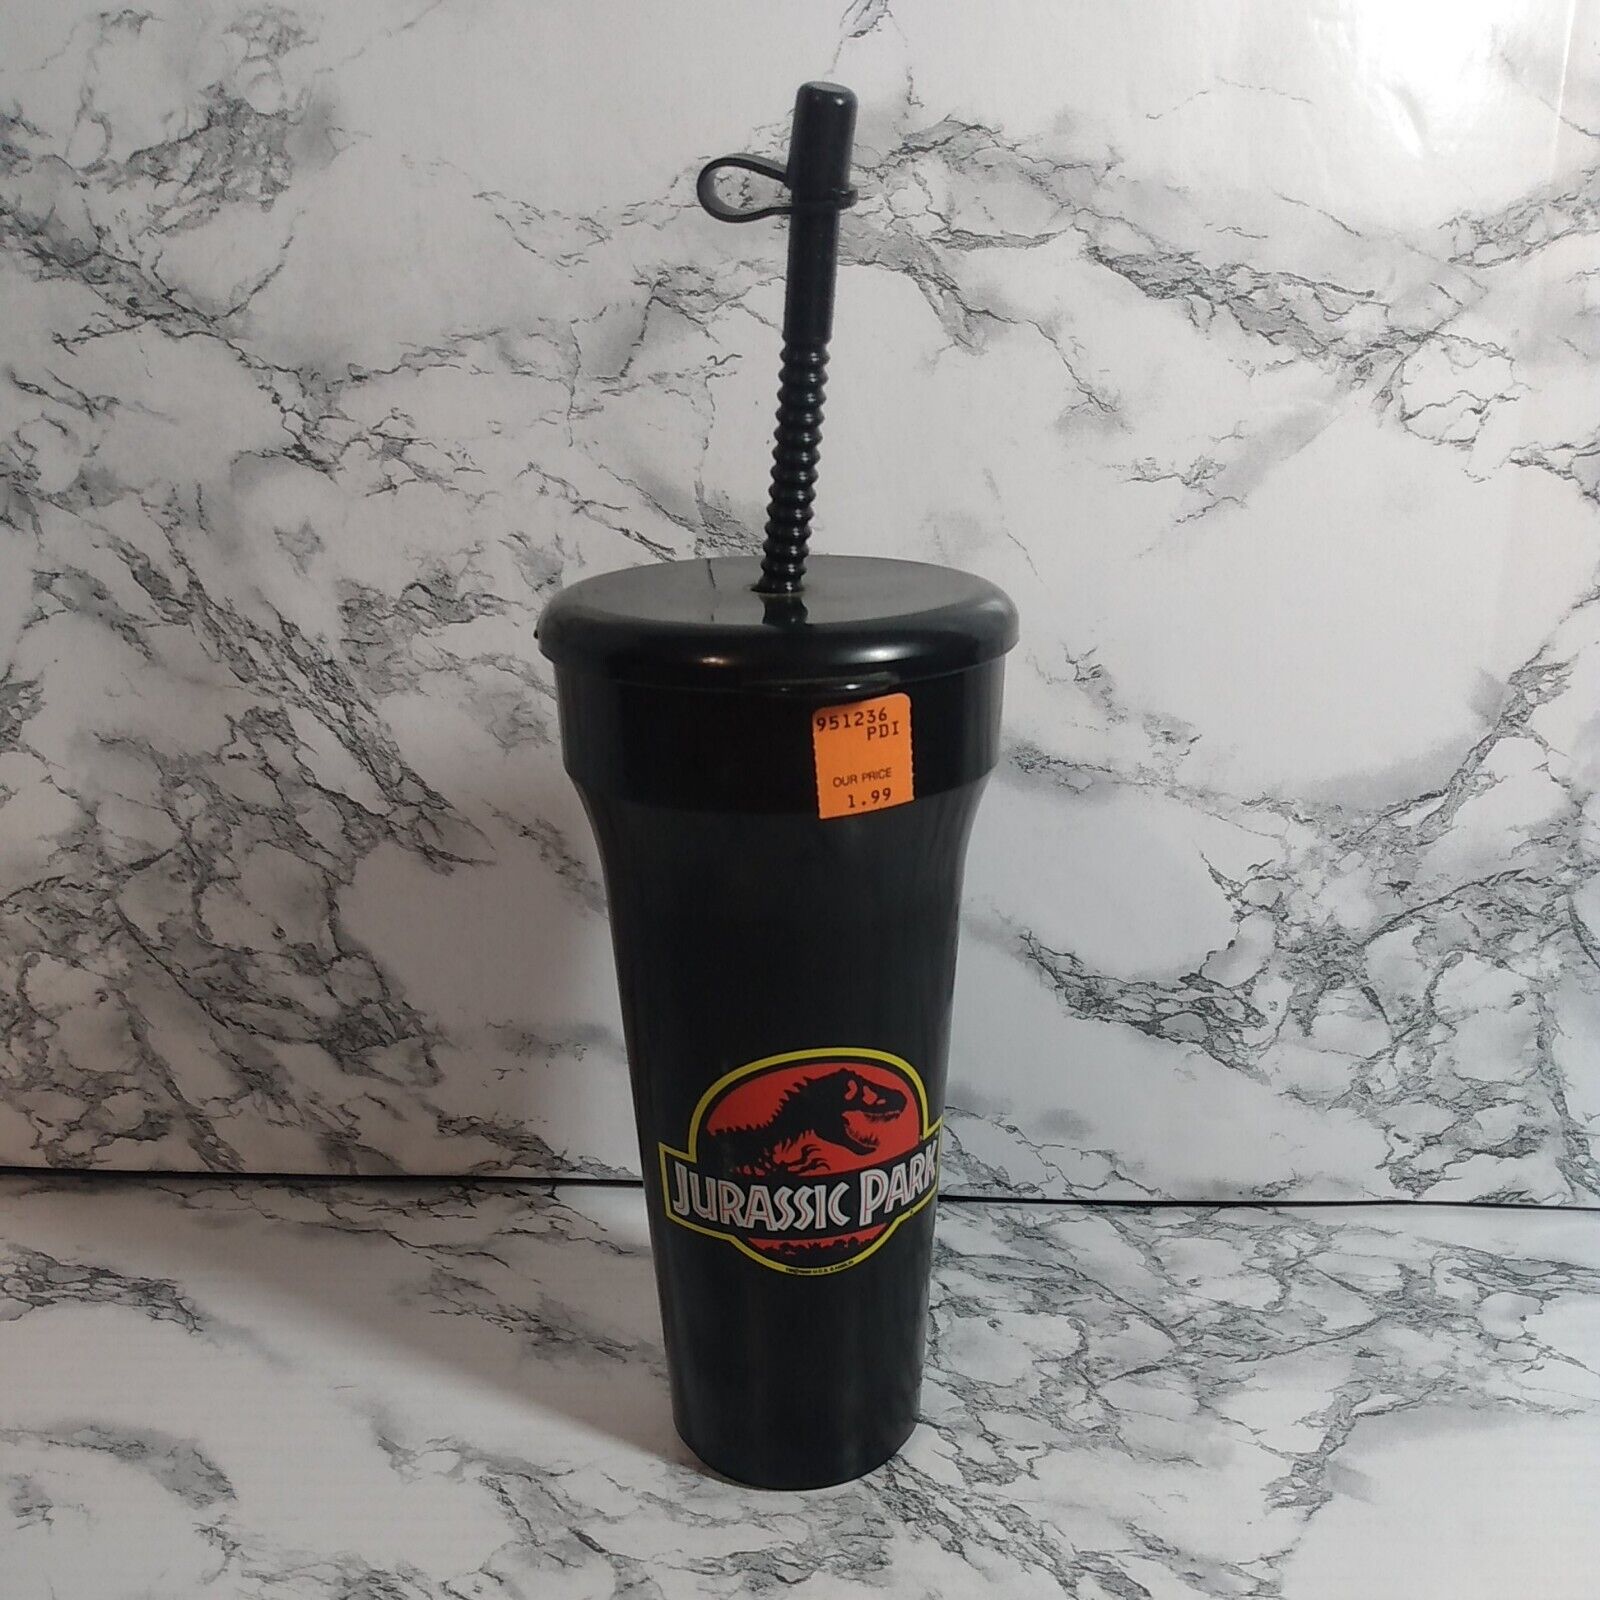 Vintage 1992 Jurassic Park super sweet rare hard to find movie Black cup theater